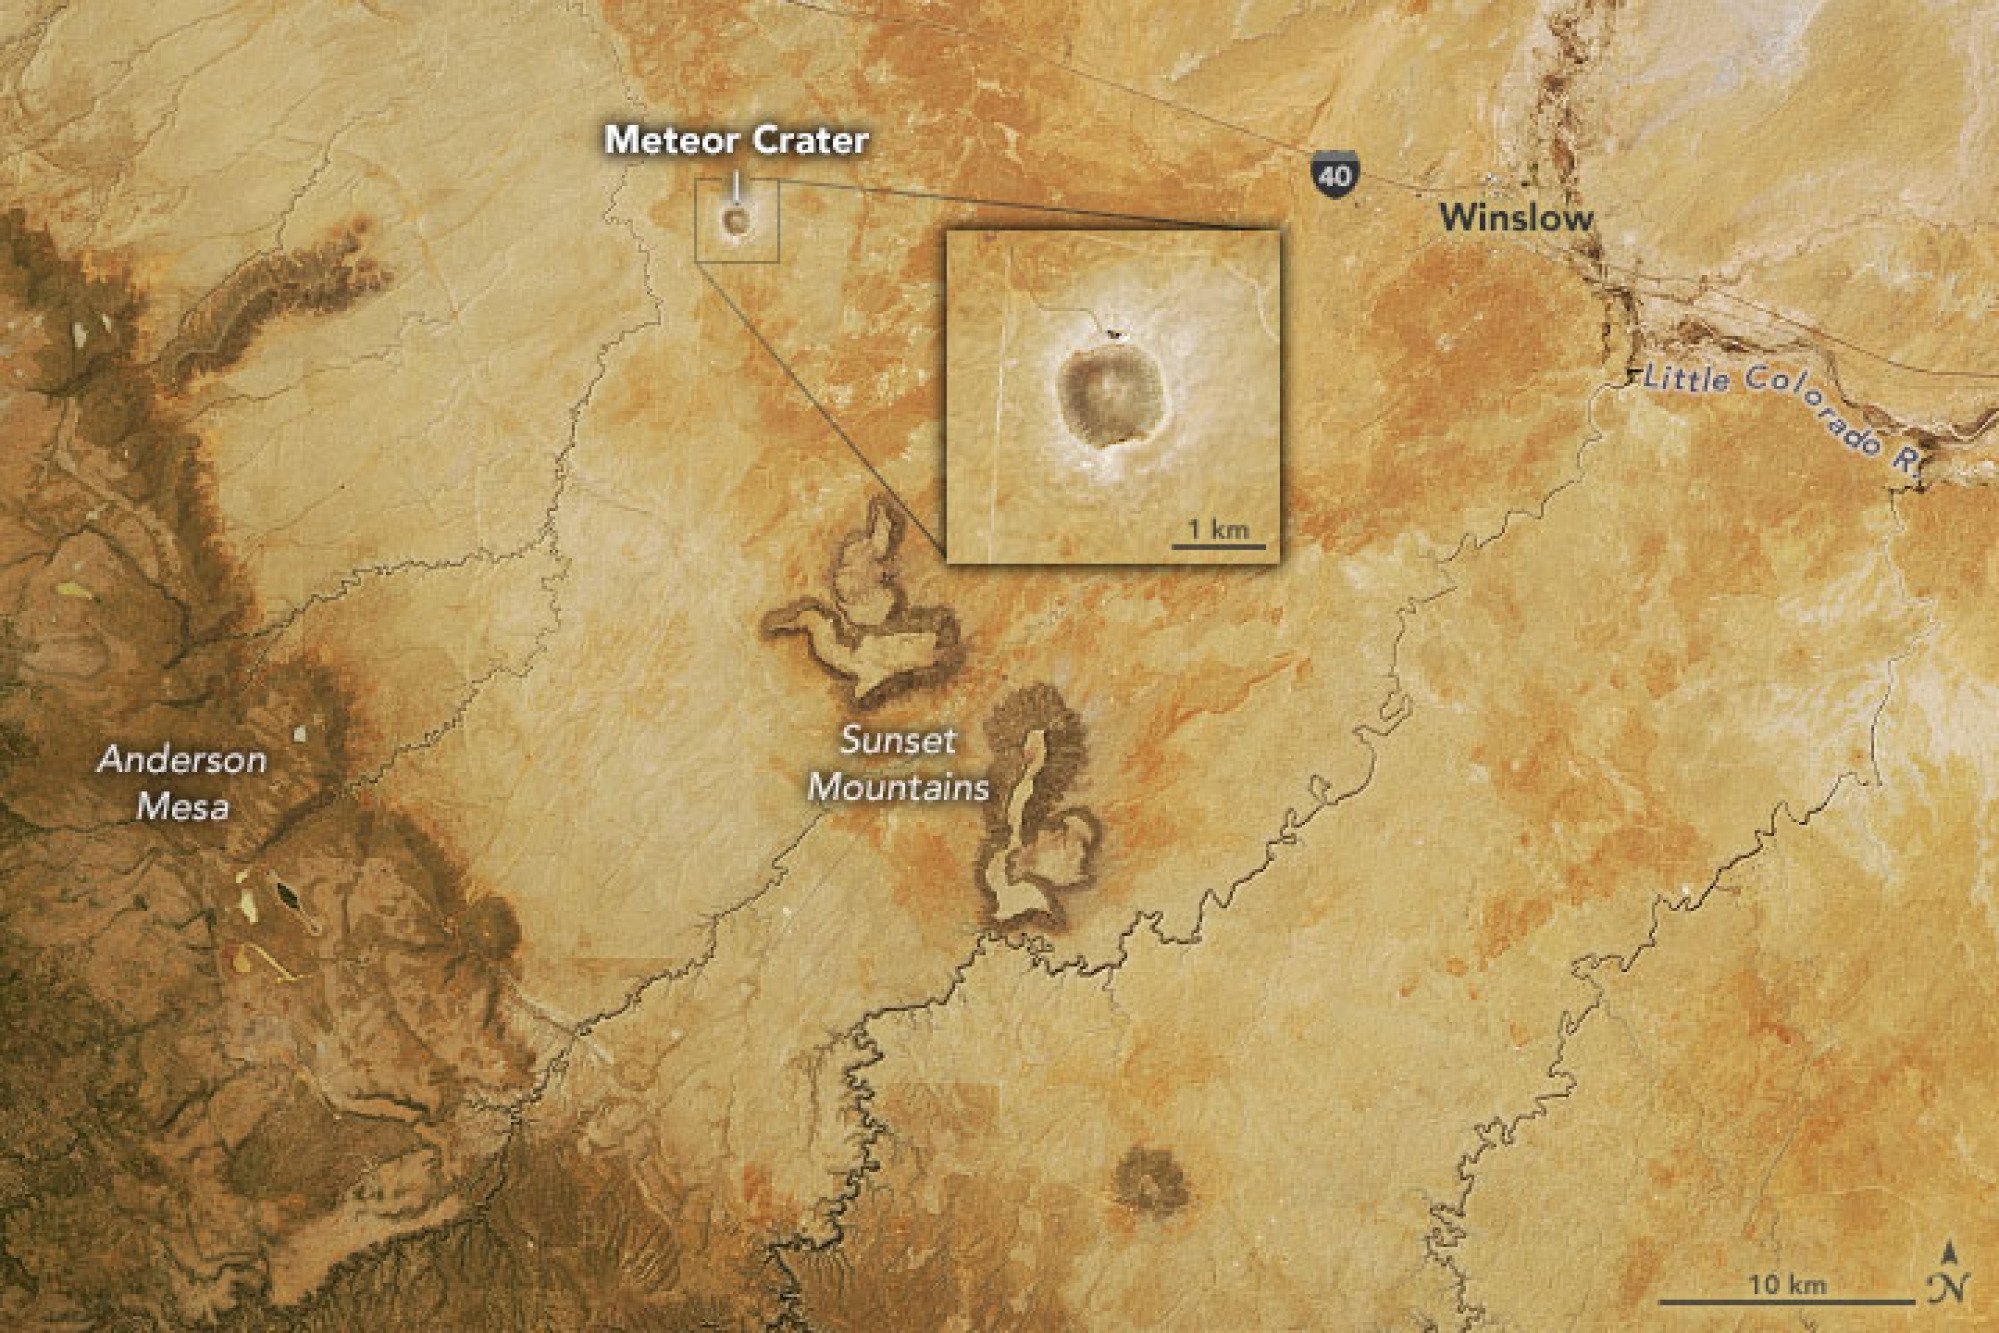 The 50,000-year-old Barringer Meteor Crater in Arizona.